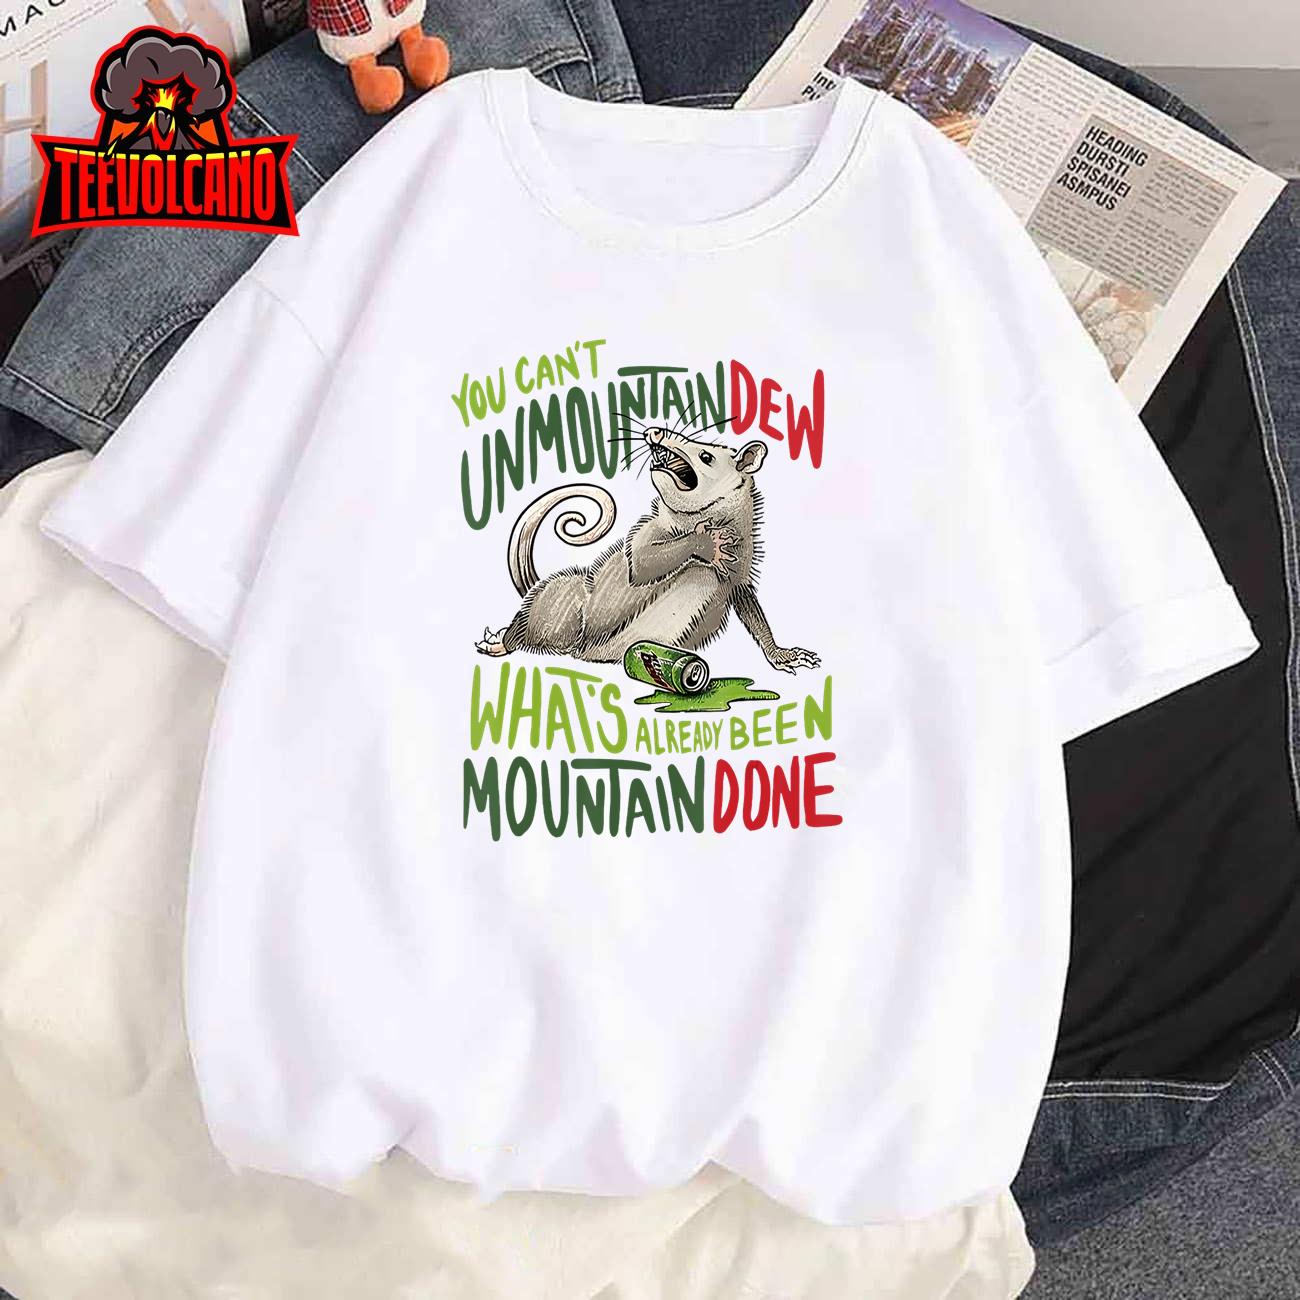 You Can’t Unmountain Dew What’s Already Been Mountain Done T-Shirt